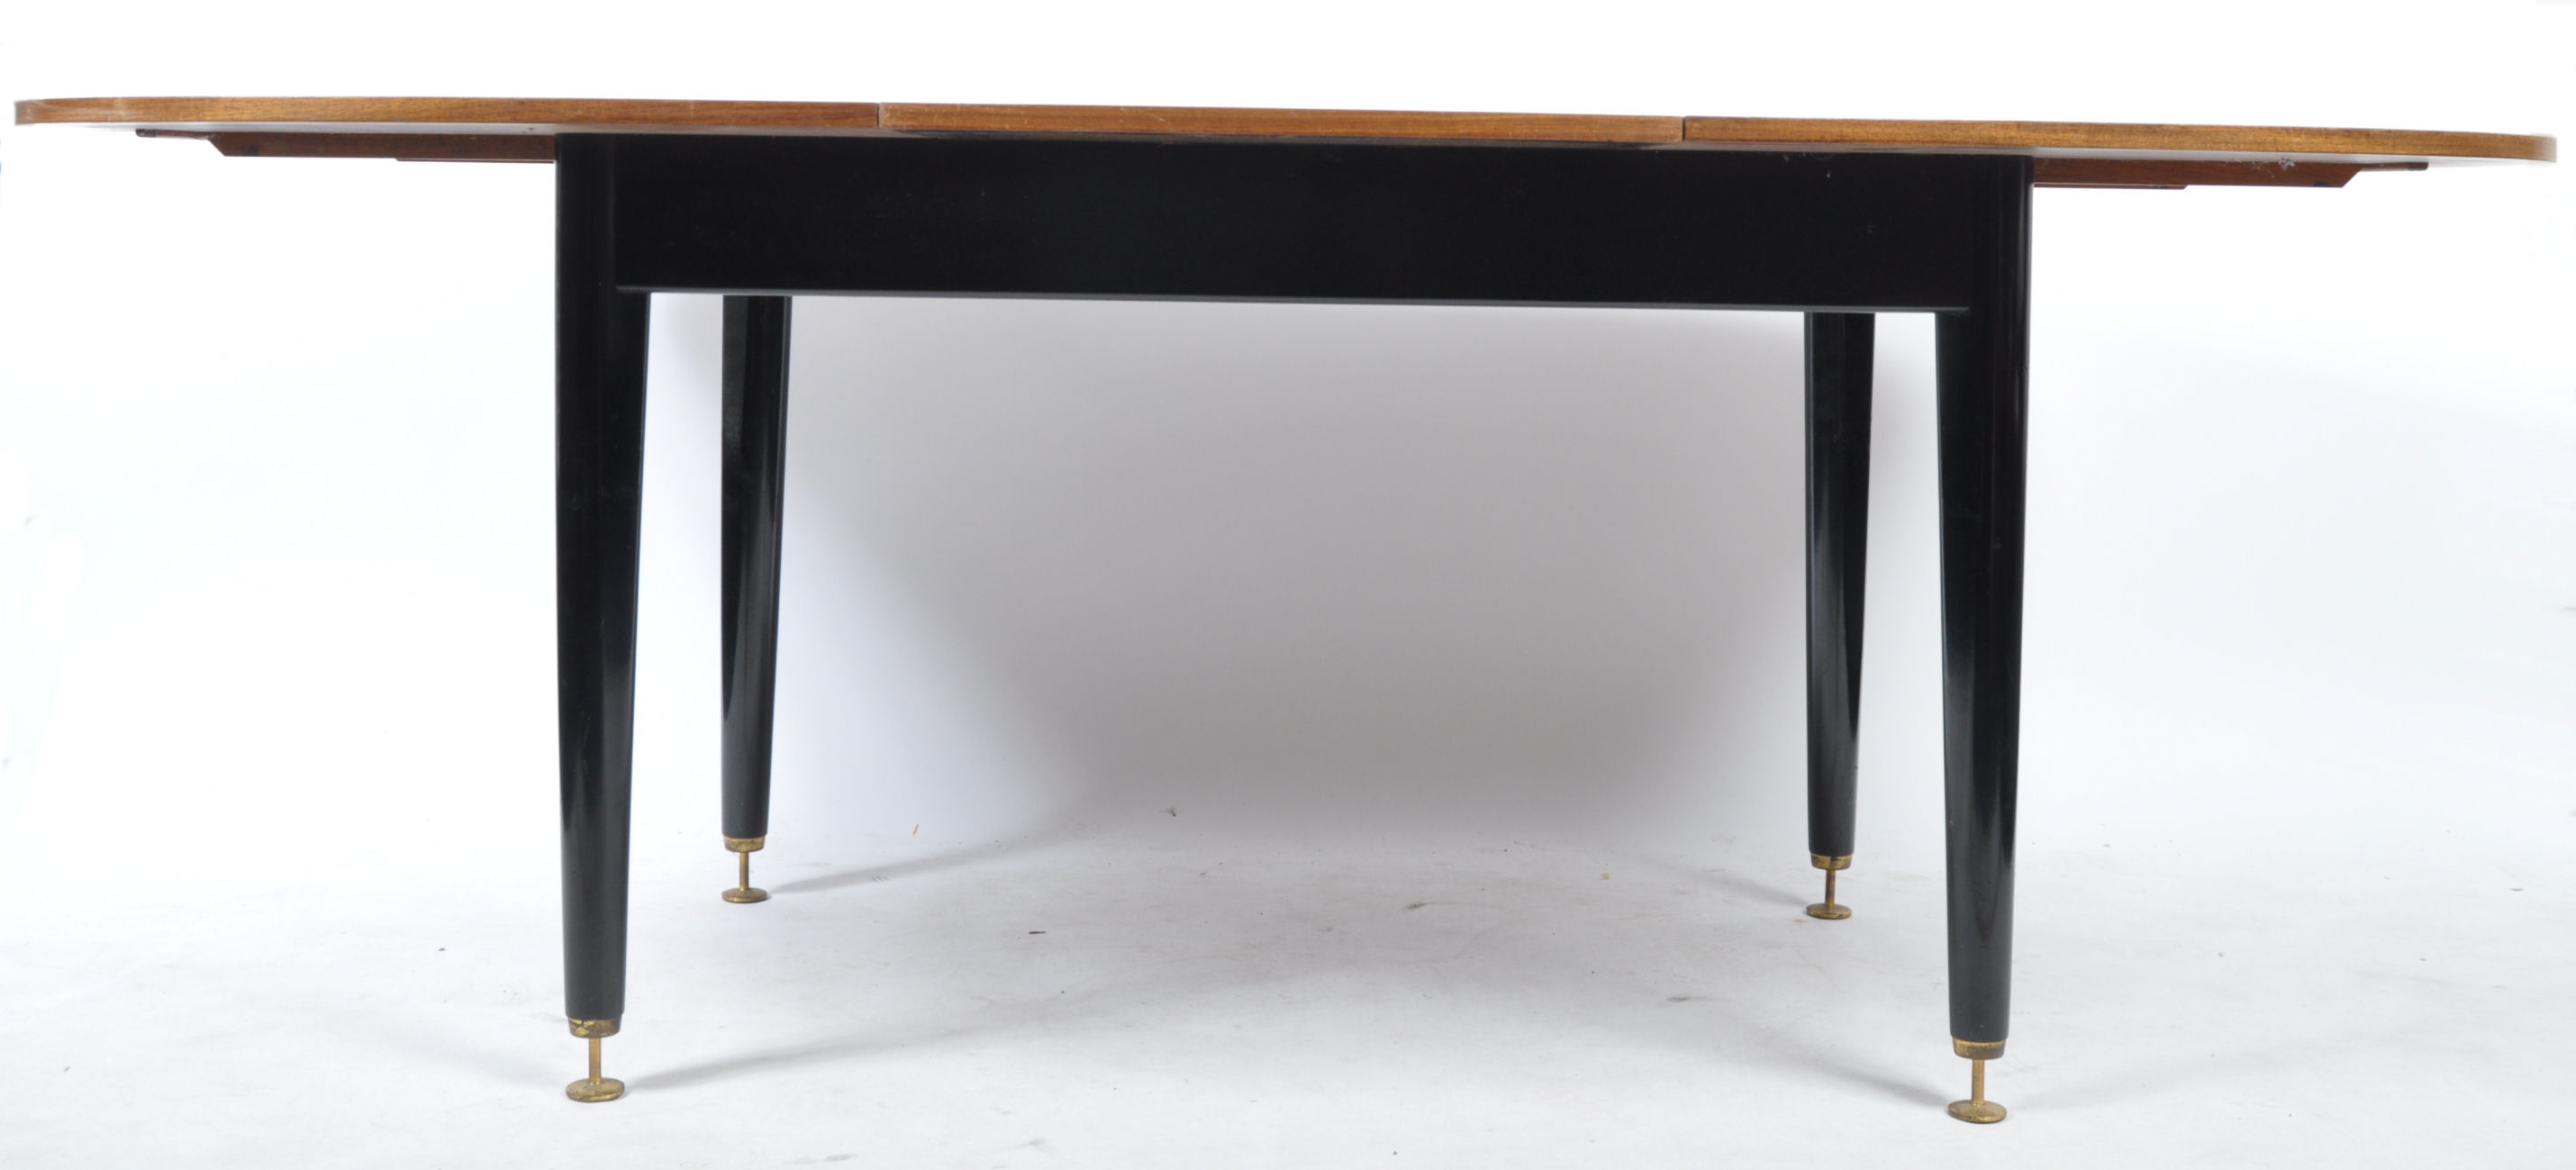 ERNEST GOMME FOR G-PLAN LIBRENZA PATTERN DINING TABLE - Image 4 of 5